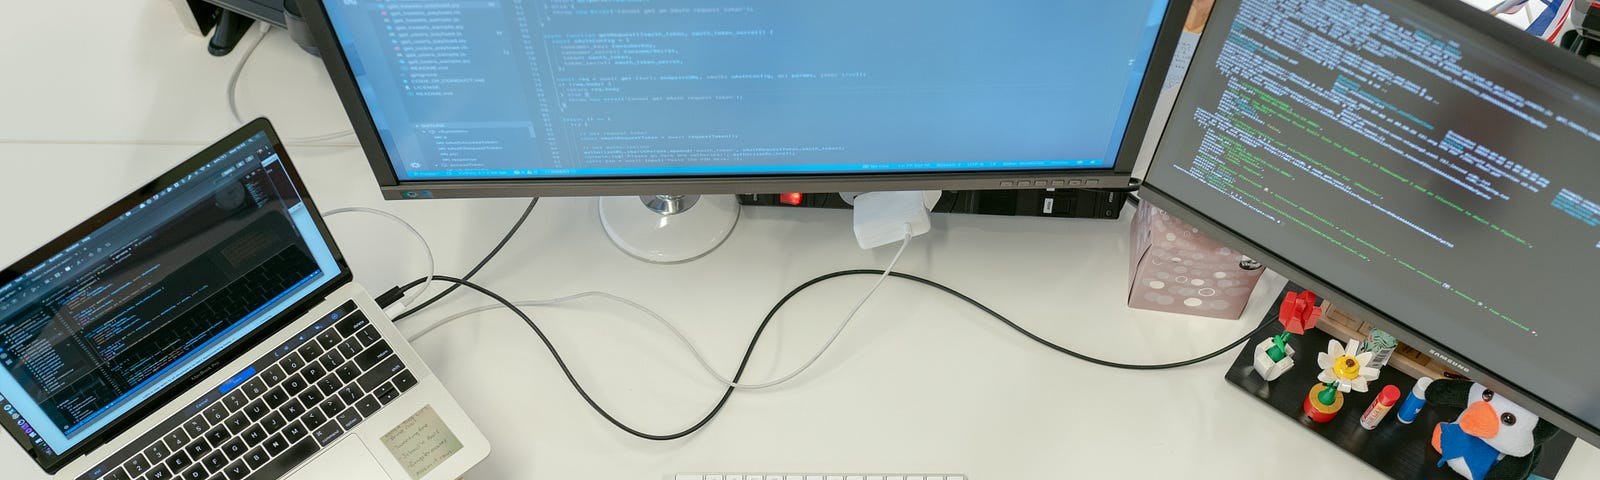 A programmer using 2 monitors and a laptop